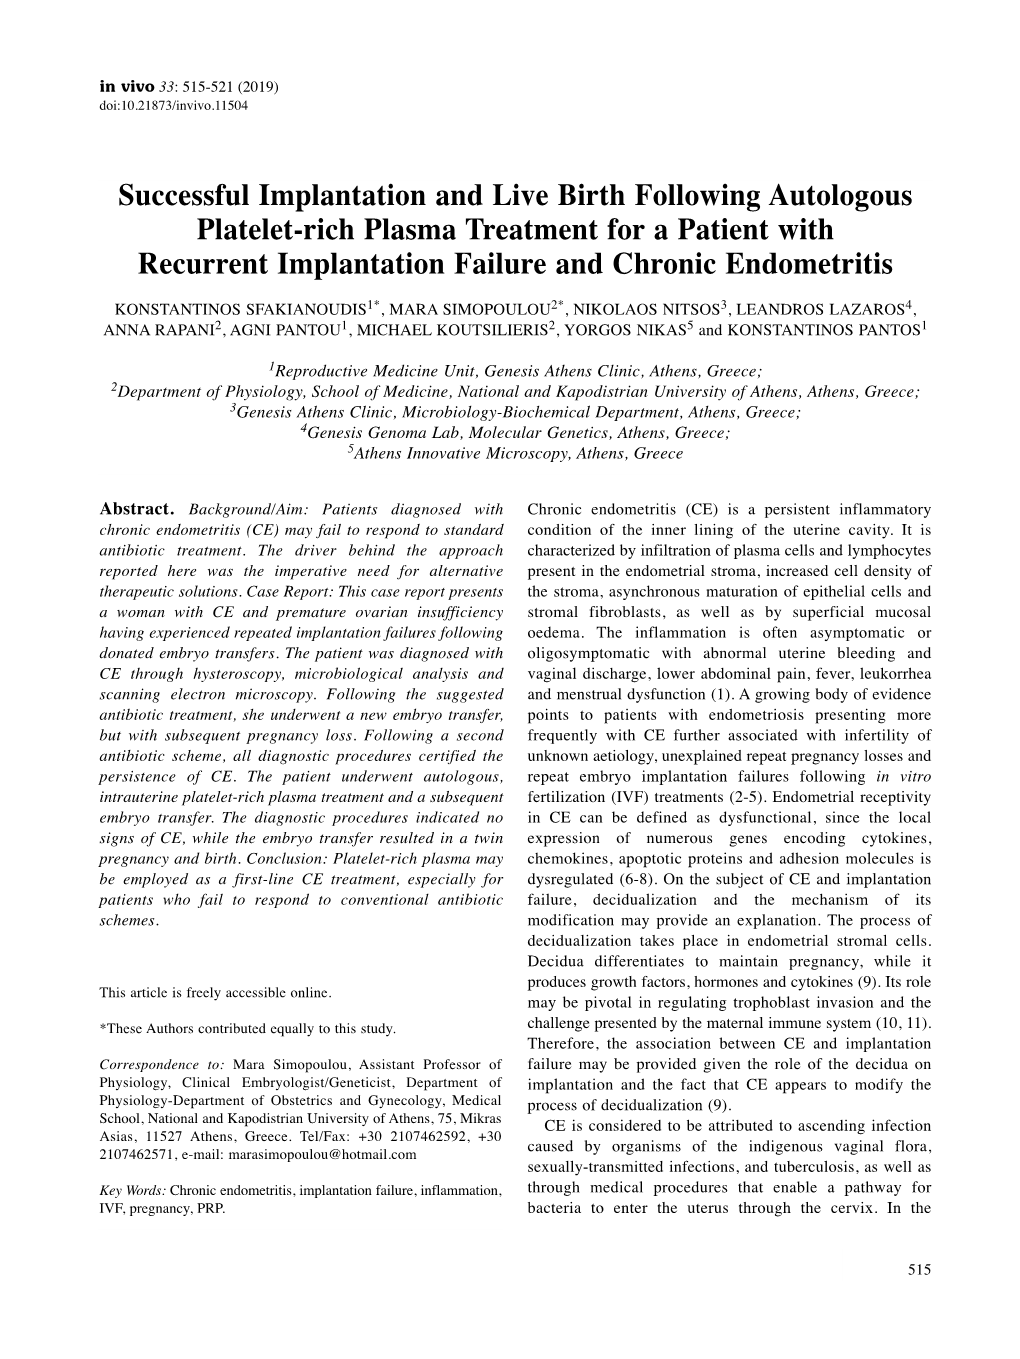 Successful Implantation and Live Birth Following Autologous Platelet-Rich